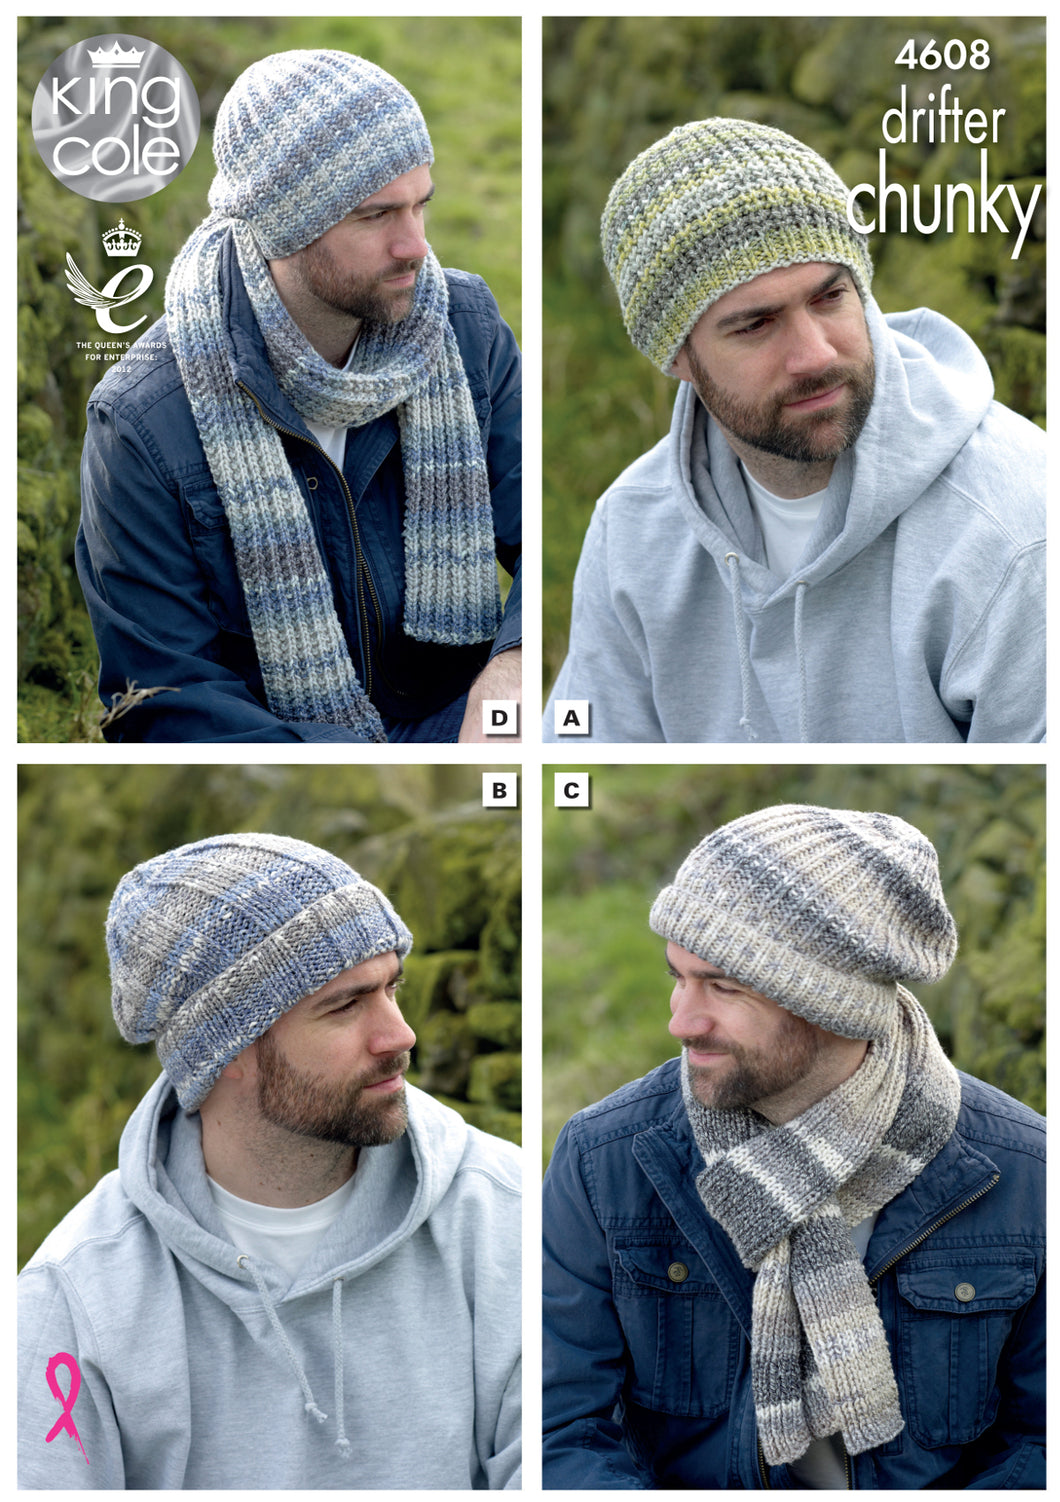 King Cole Chunky Knitting Pattern - Mens Hats & Scarves (4608)